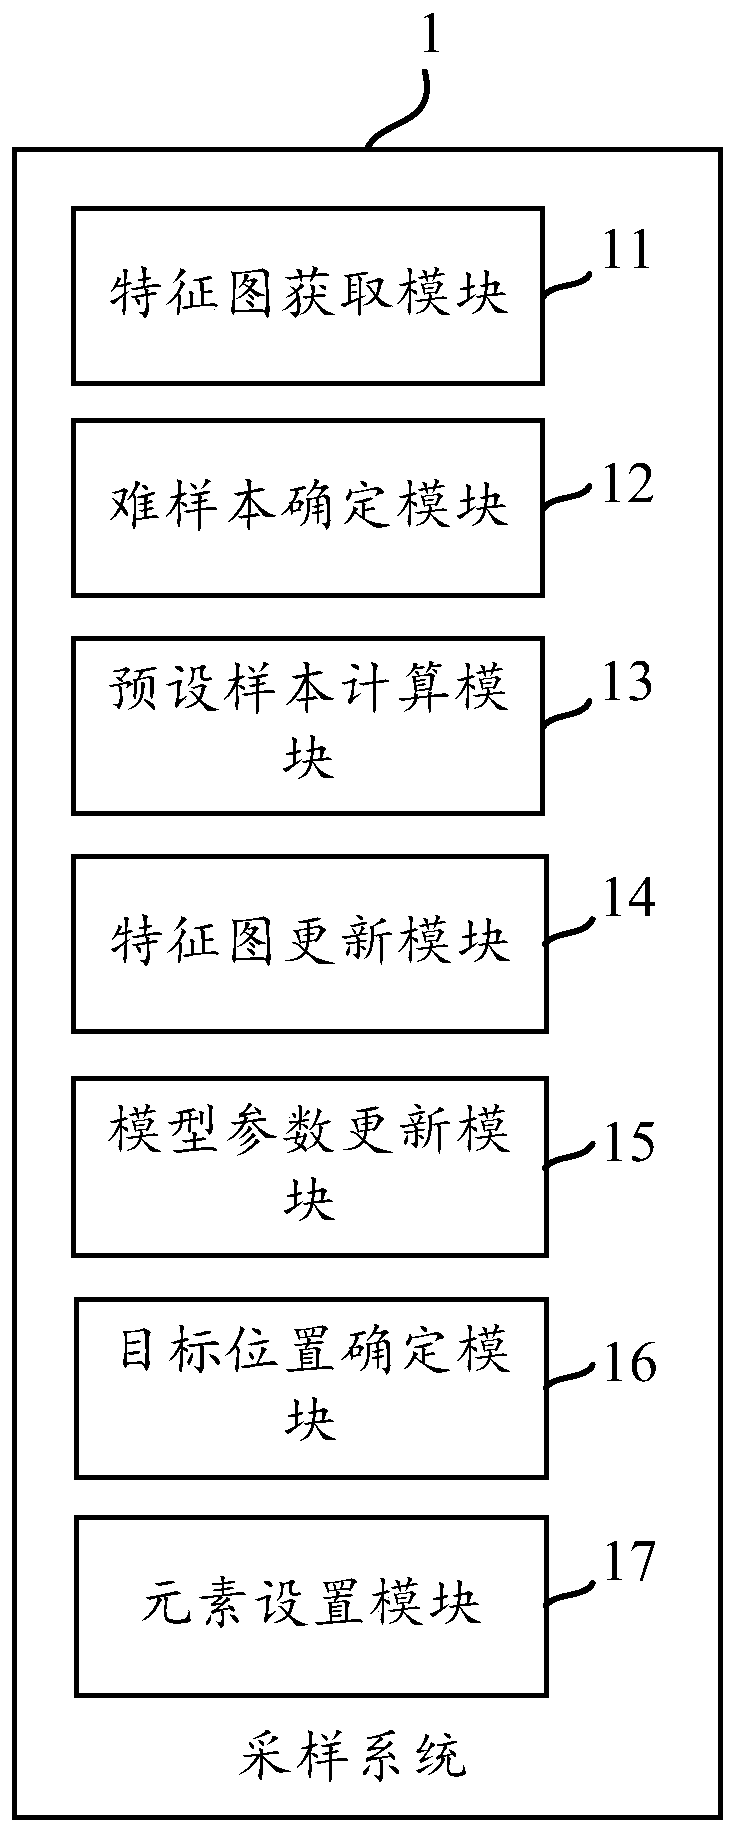 Difficulty sample sampling method and system